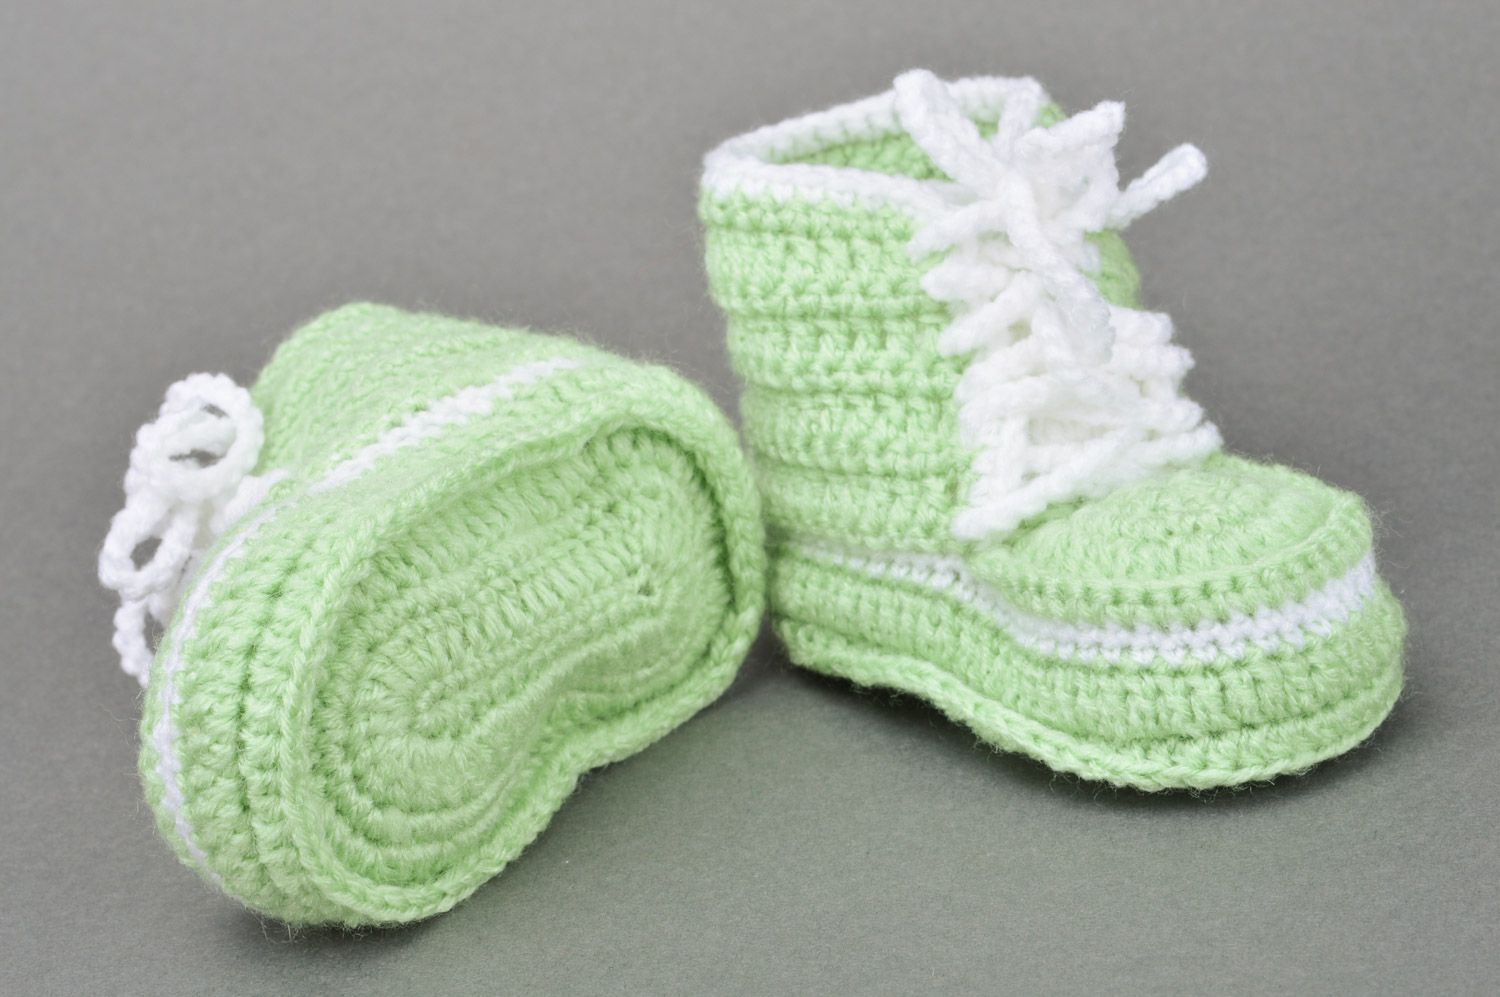 Handmade crocheted lace light green baby booties made of cotton photo 5